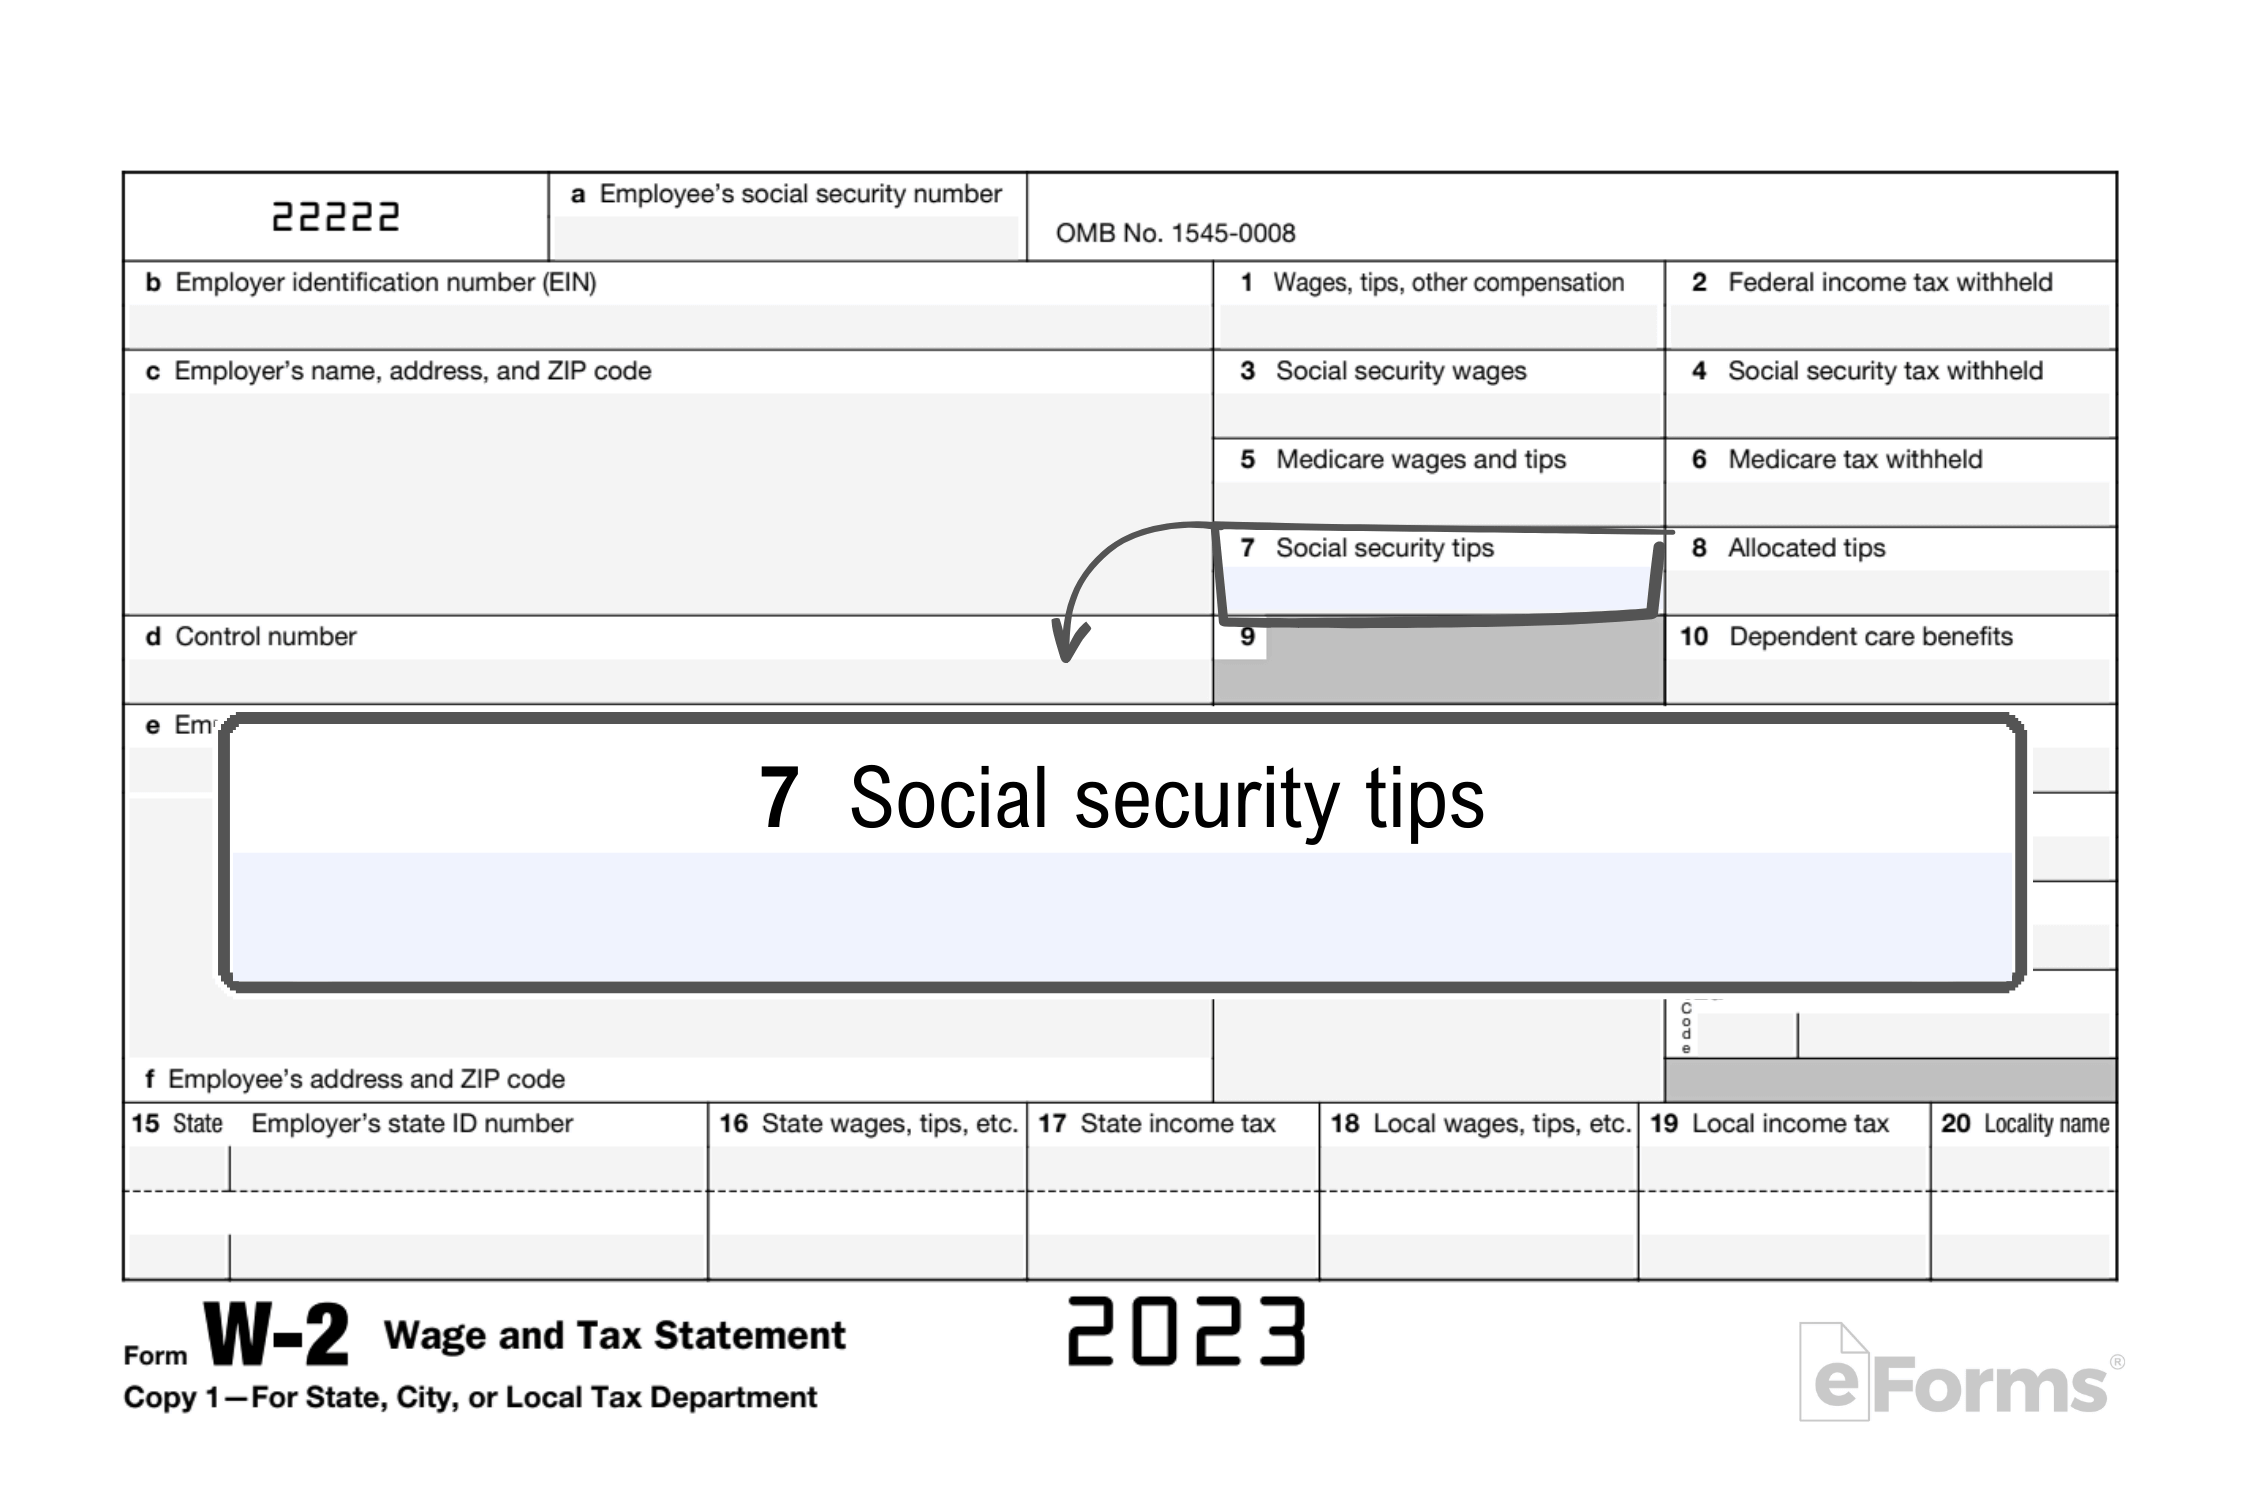 Free Irs Form W-2 | Wage And Tax Statement - Pdf – Eforms in Social Security W2 Form Request